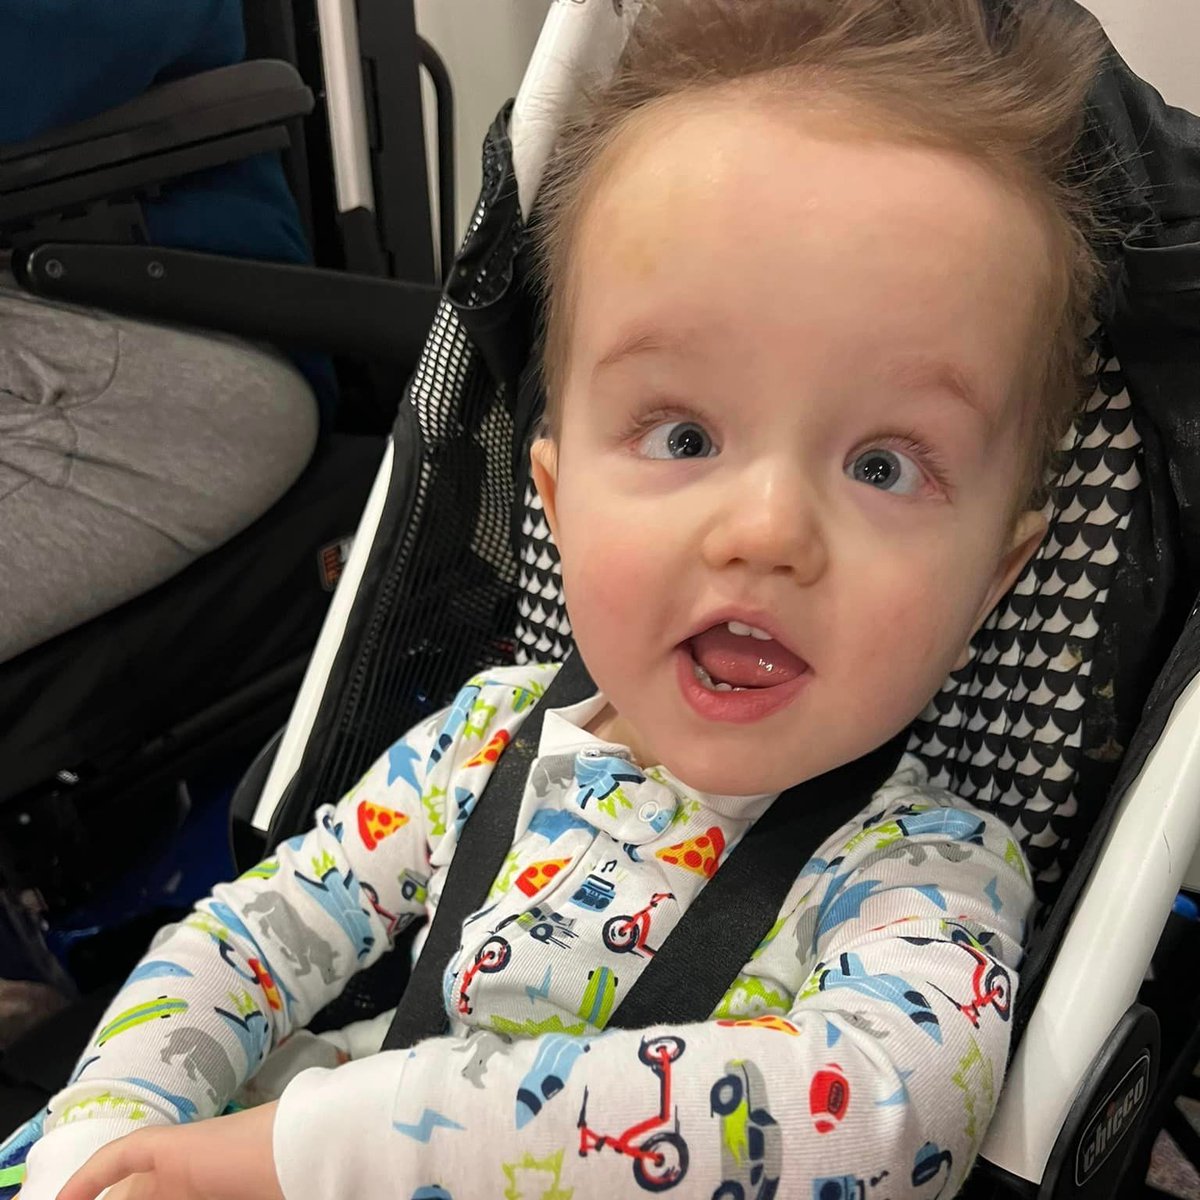 🥳🧁Happy Birthday Bradan🎗️🥳”Diagnosed with medulloblastoma at just 4 months old, Bradan inspires his family every day with his warrior spirit. 💪🏼Bradan is not just a warrior, but an Ambassador for The Cure Starts Now! Since completing treatment, he is working diligently to